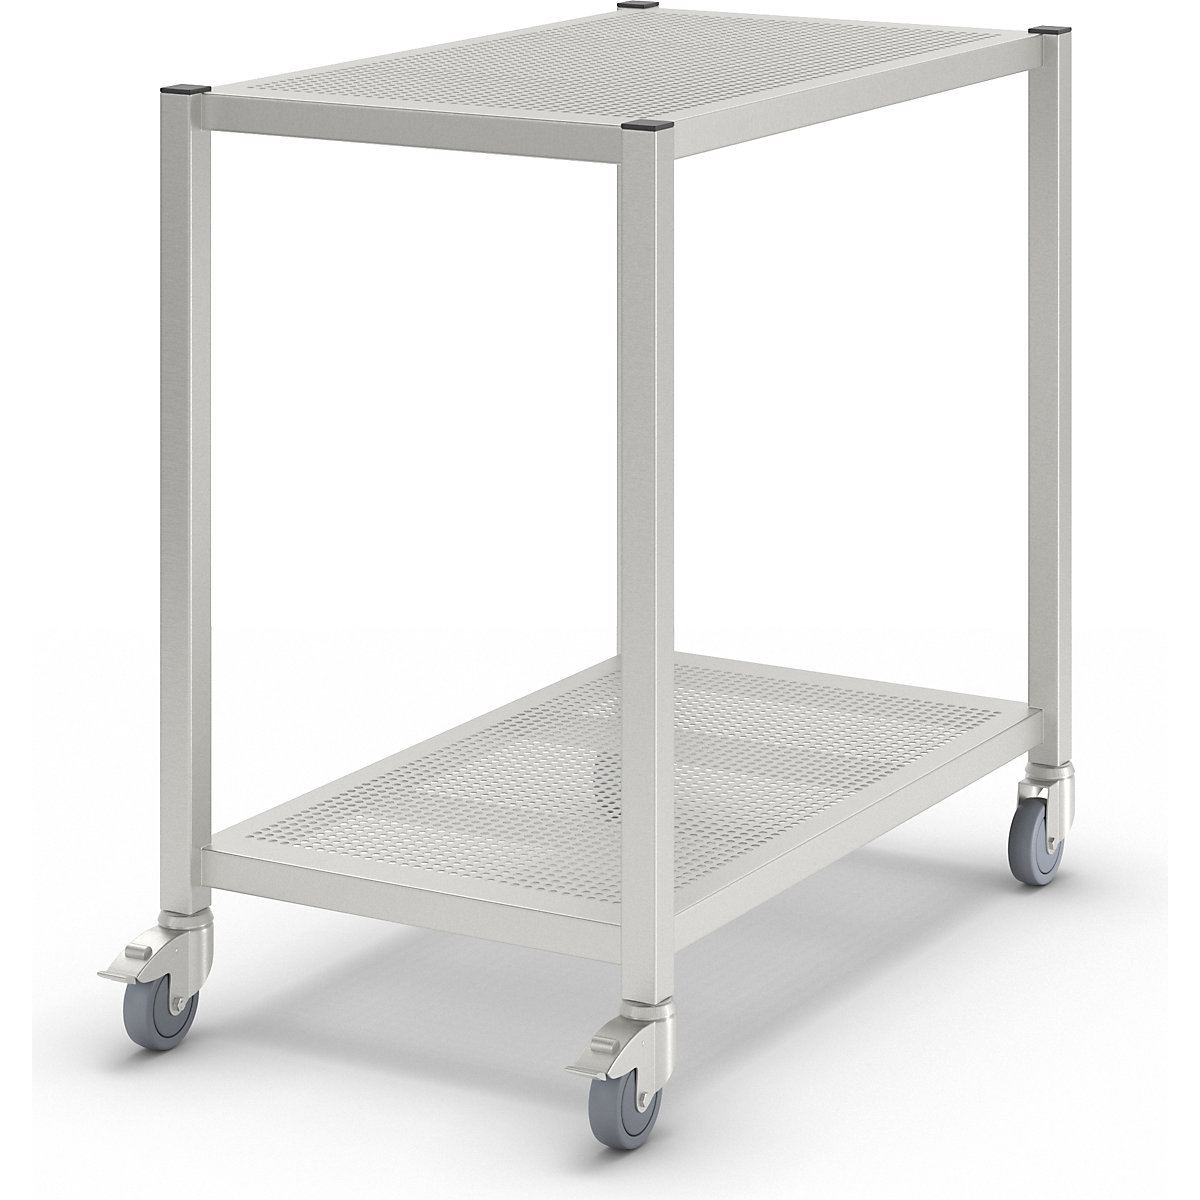 Mobile cleanroom table, made of stainless steel, 2 shelves, length 1000 mm-2